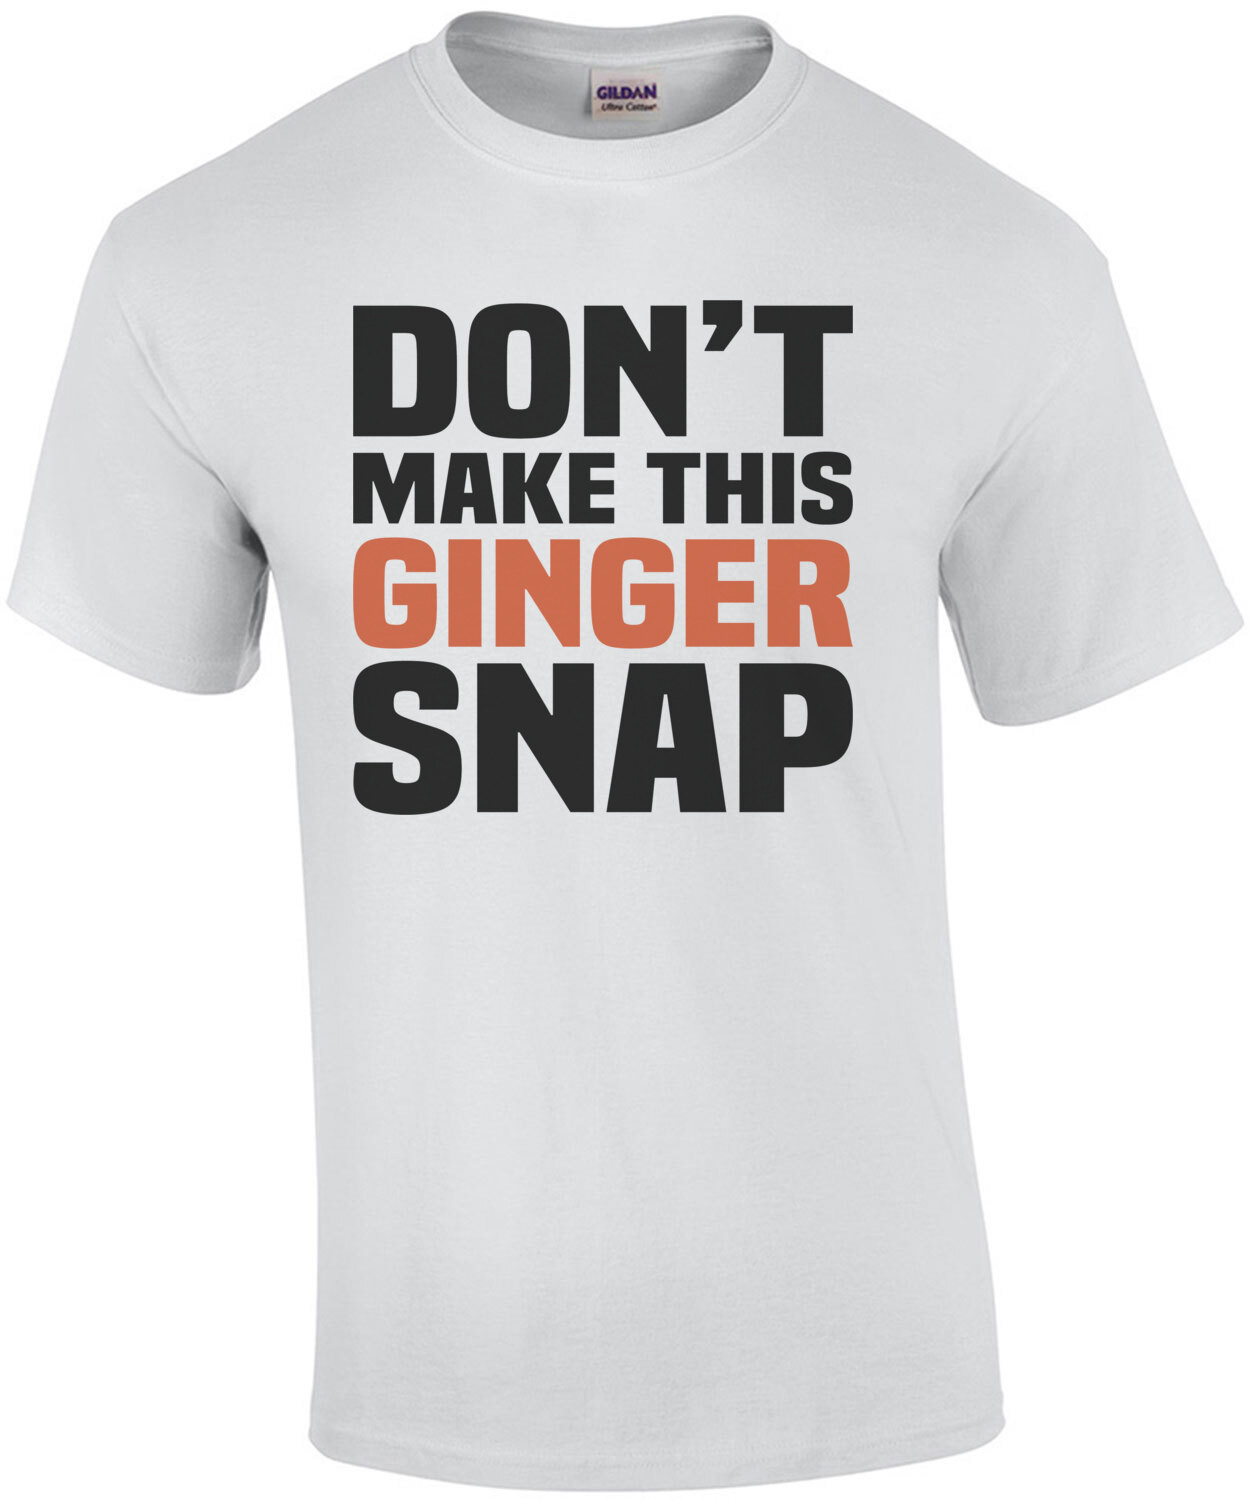 Don't make this ginger snap - funny redhead - gingersnap cookie pun t-shirt